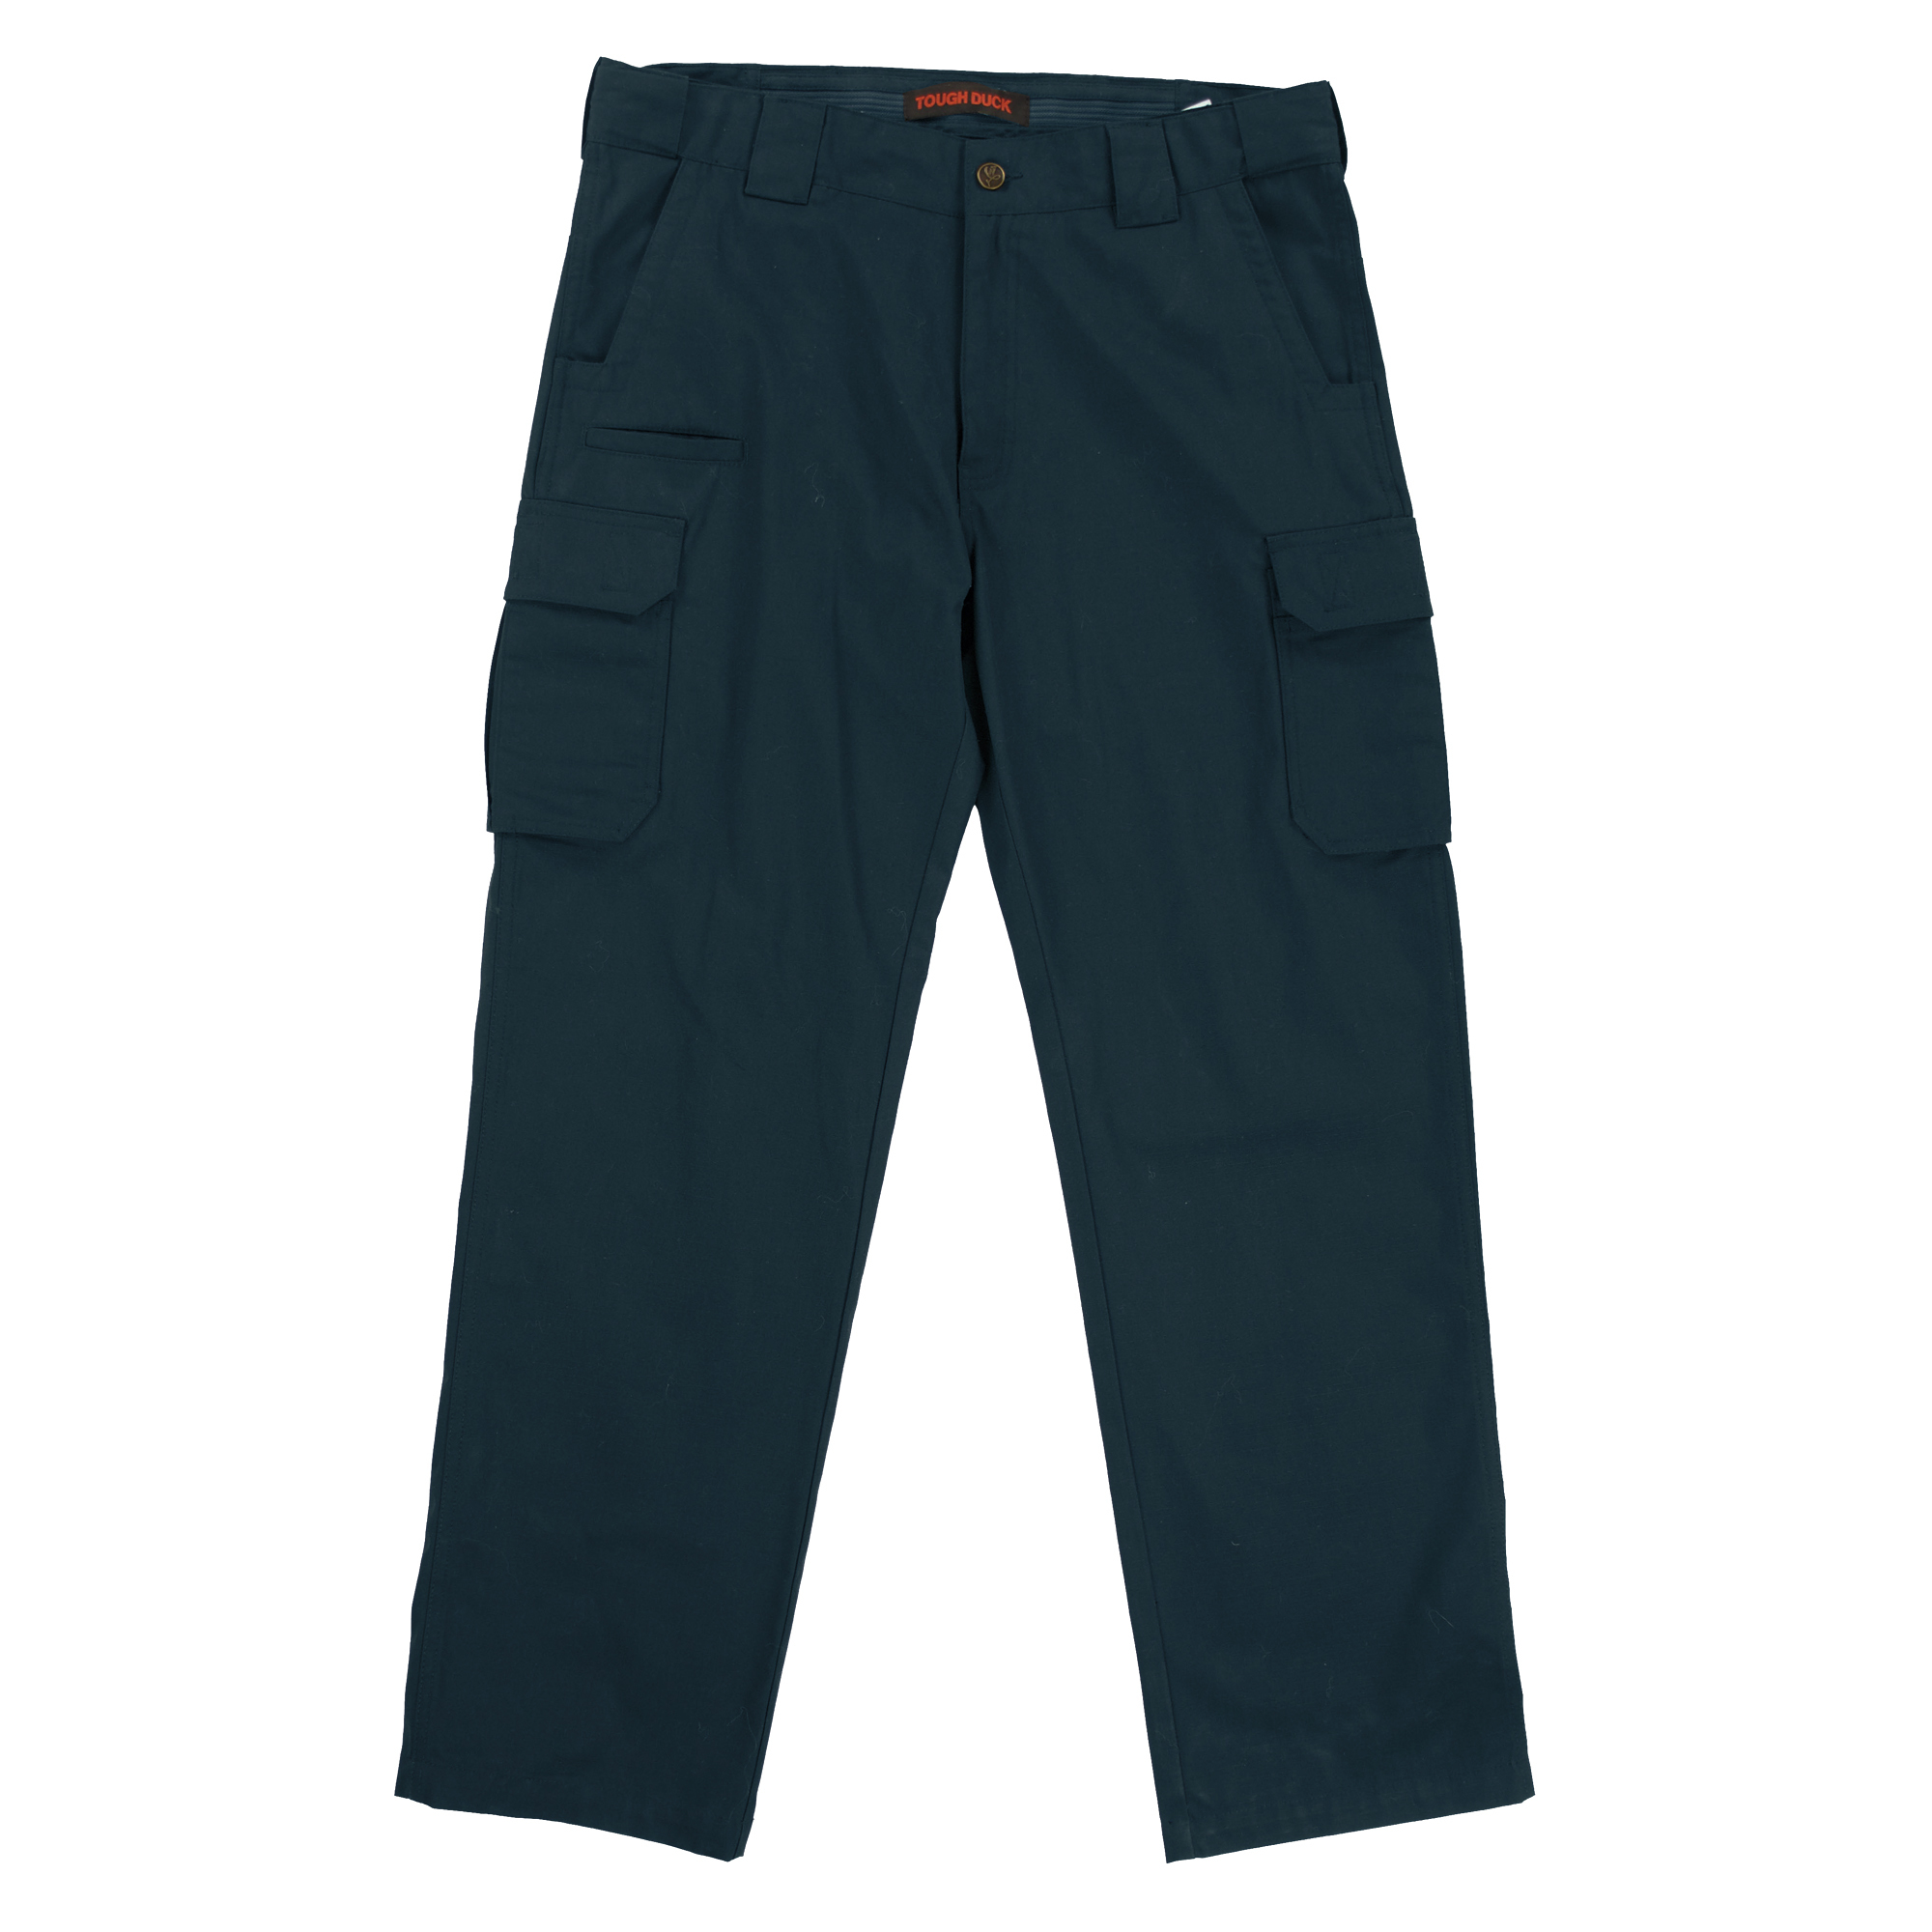 Tough Duck, Ripstop Cargo Pant, Waist 50 in, Inseam 30 in, Color Navy, Model WP110